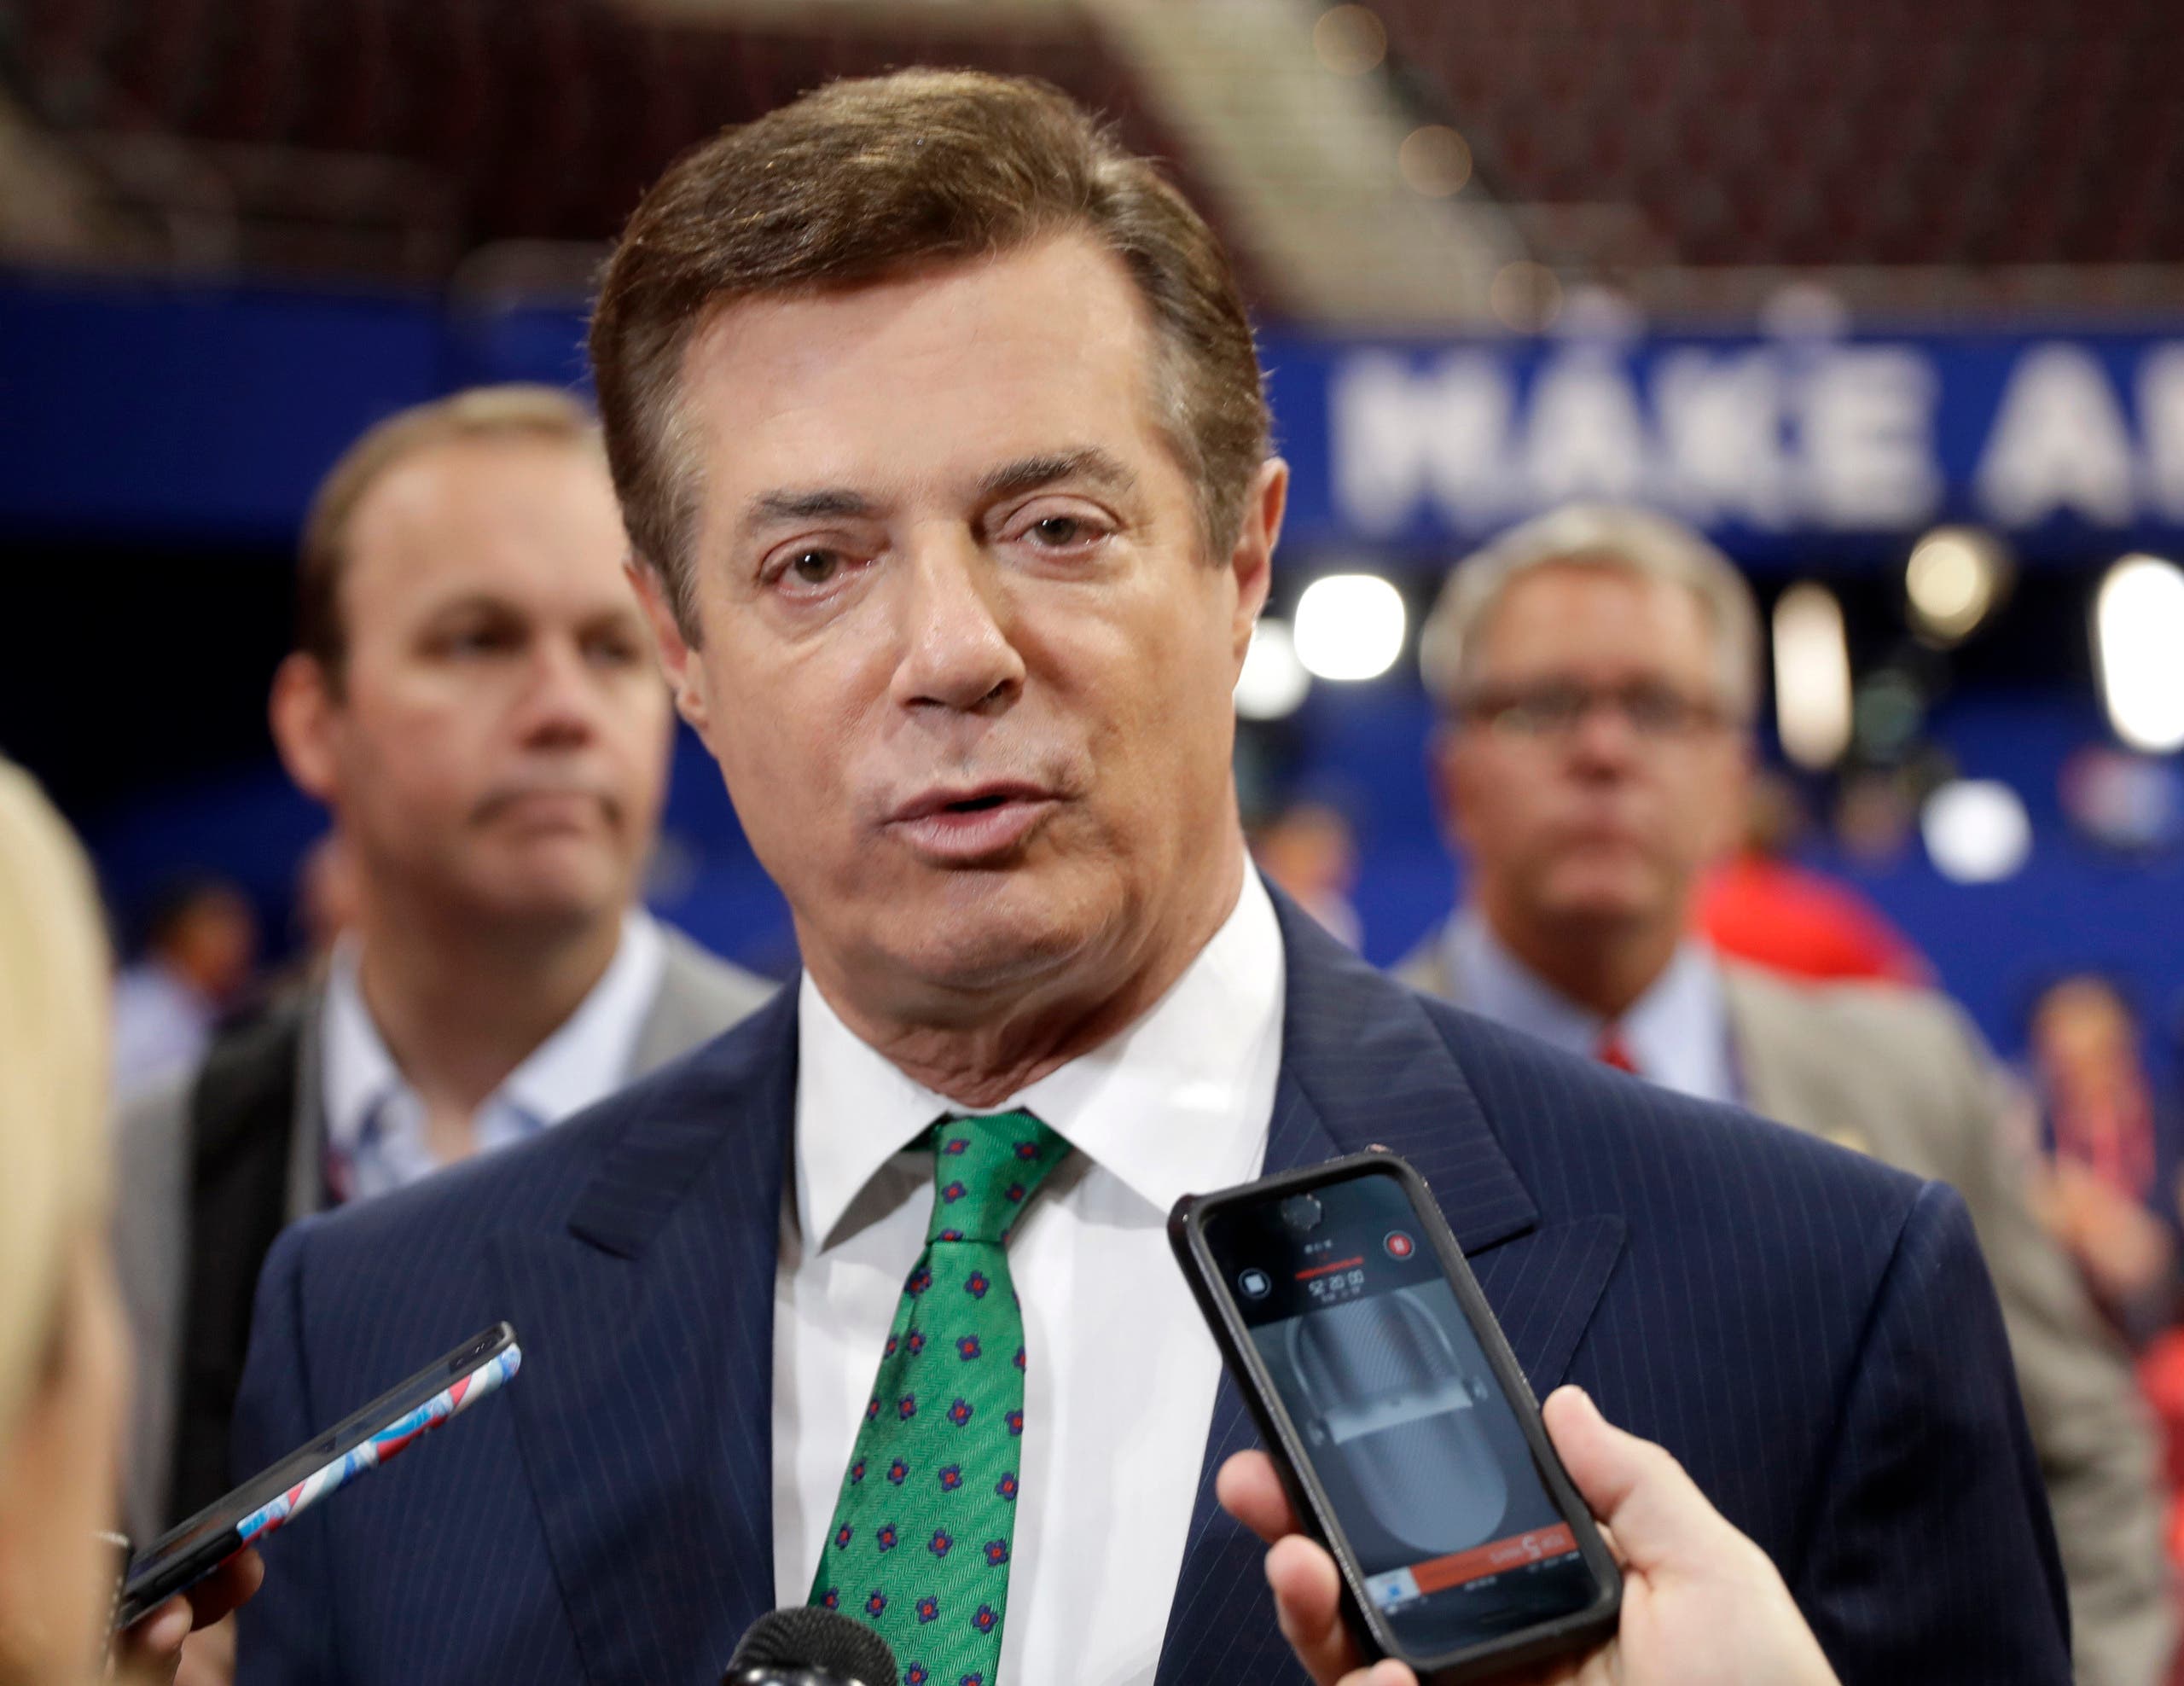 In this July 17, 2016 file photo, Trump Campaign Chairman Paul Manafort talks to reporters on the floor of the Republican National Convention at Quicken Loans Arena in Cleveland. (File photo: AP)